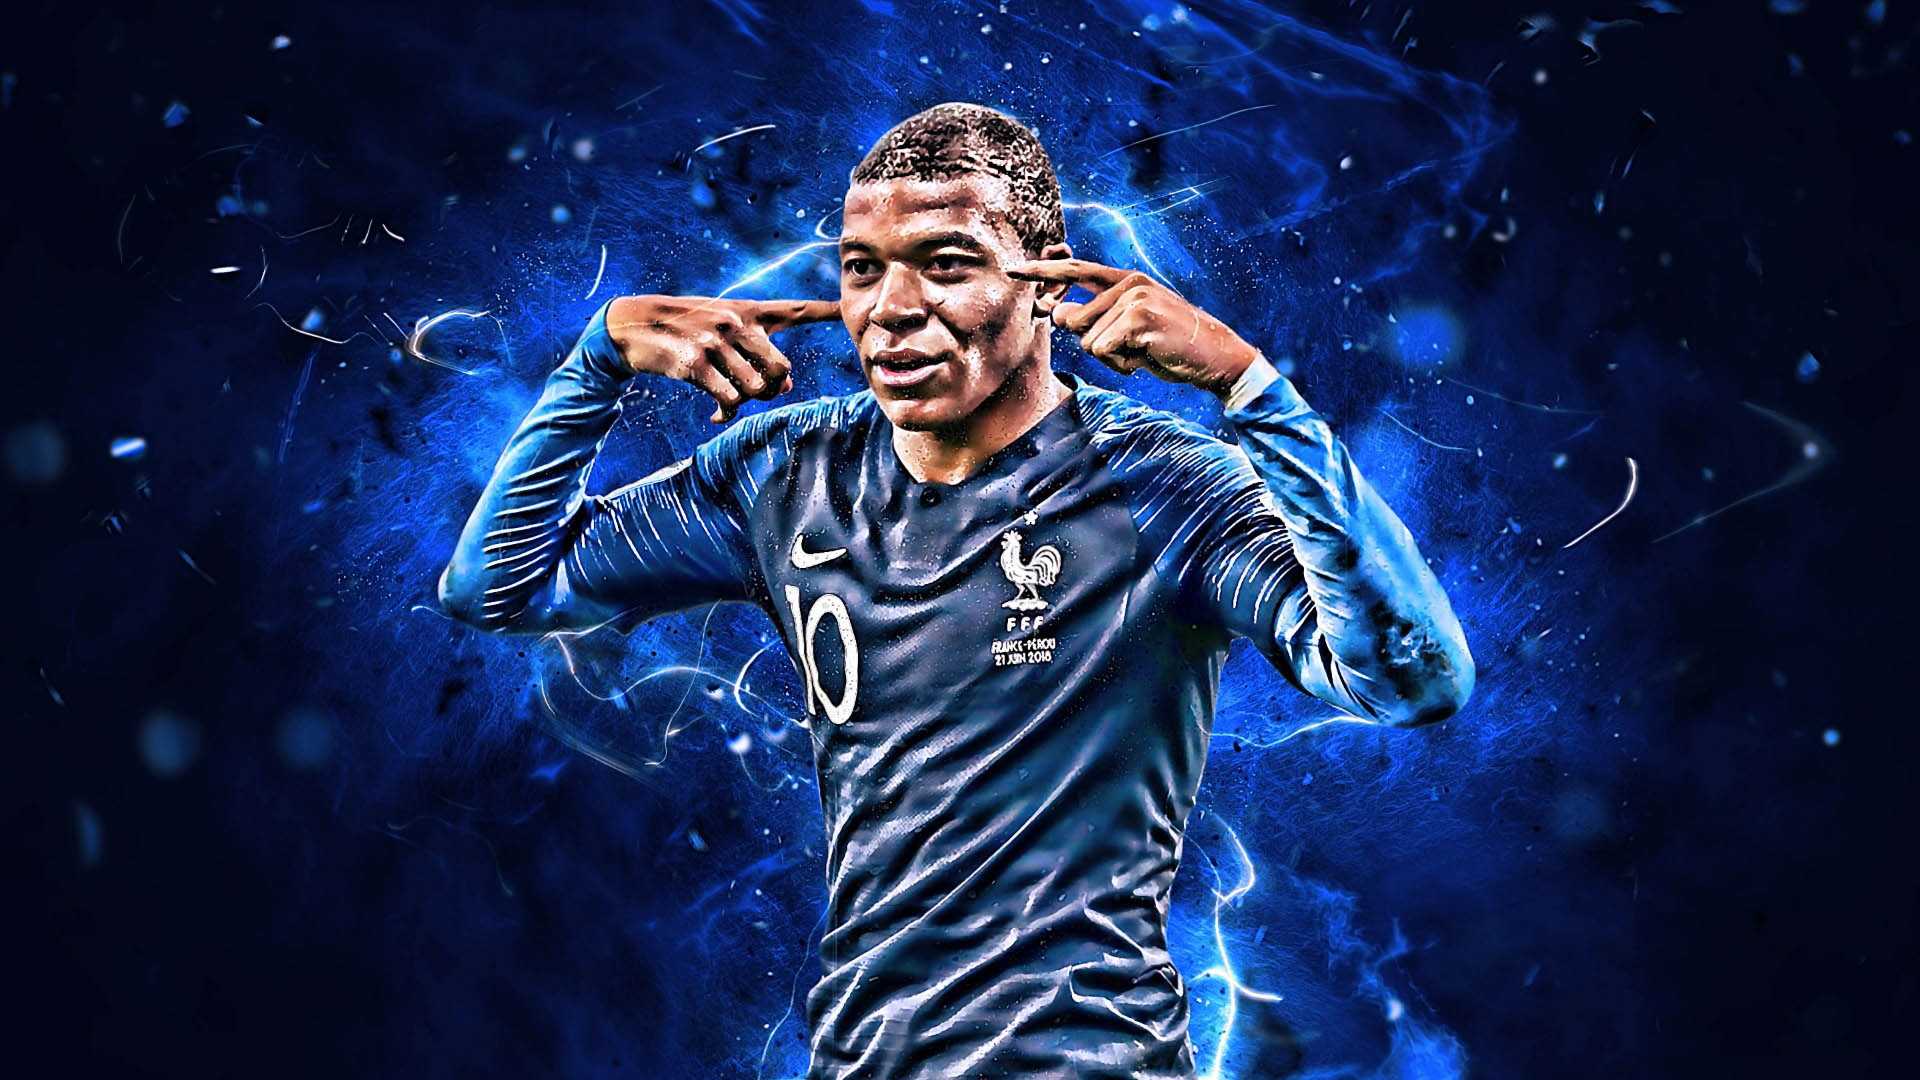 10. Mbappe Blue Hair Wallpaper for iPhone X - wide 1